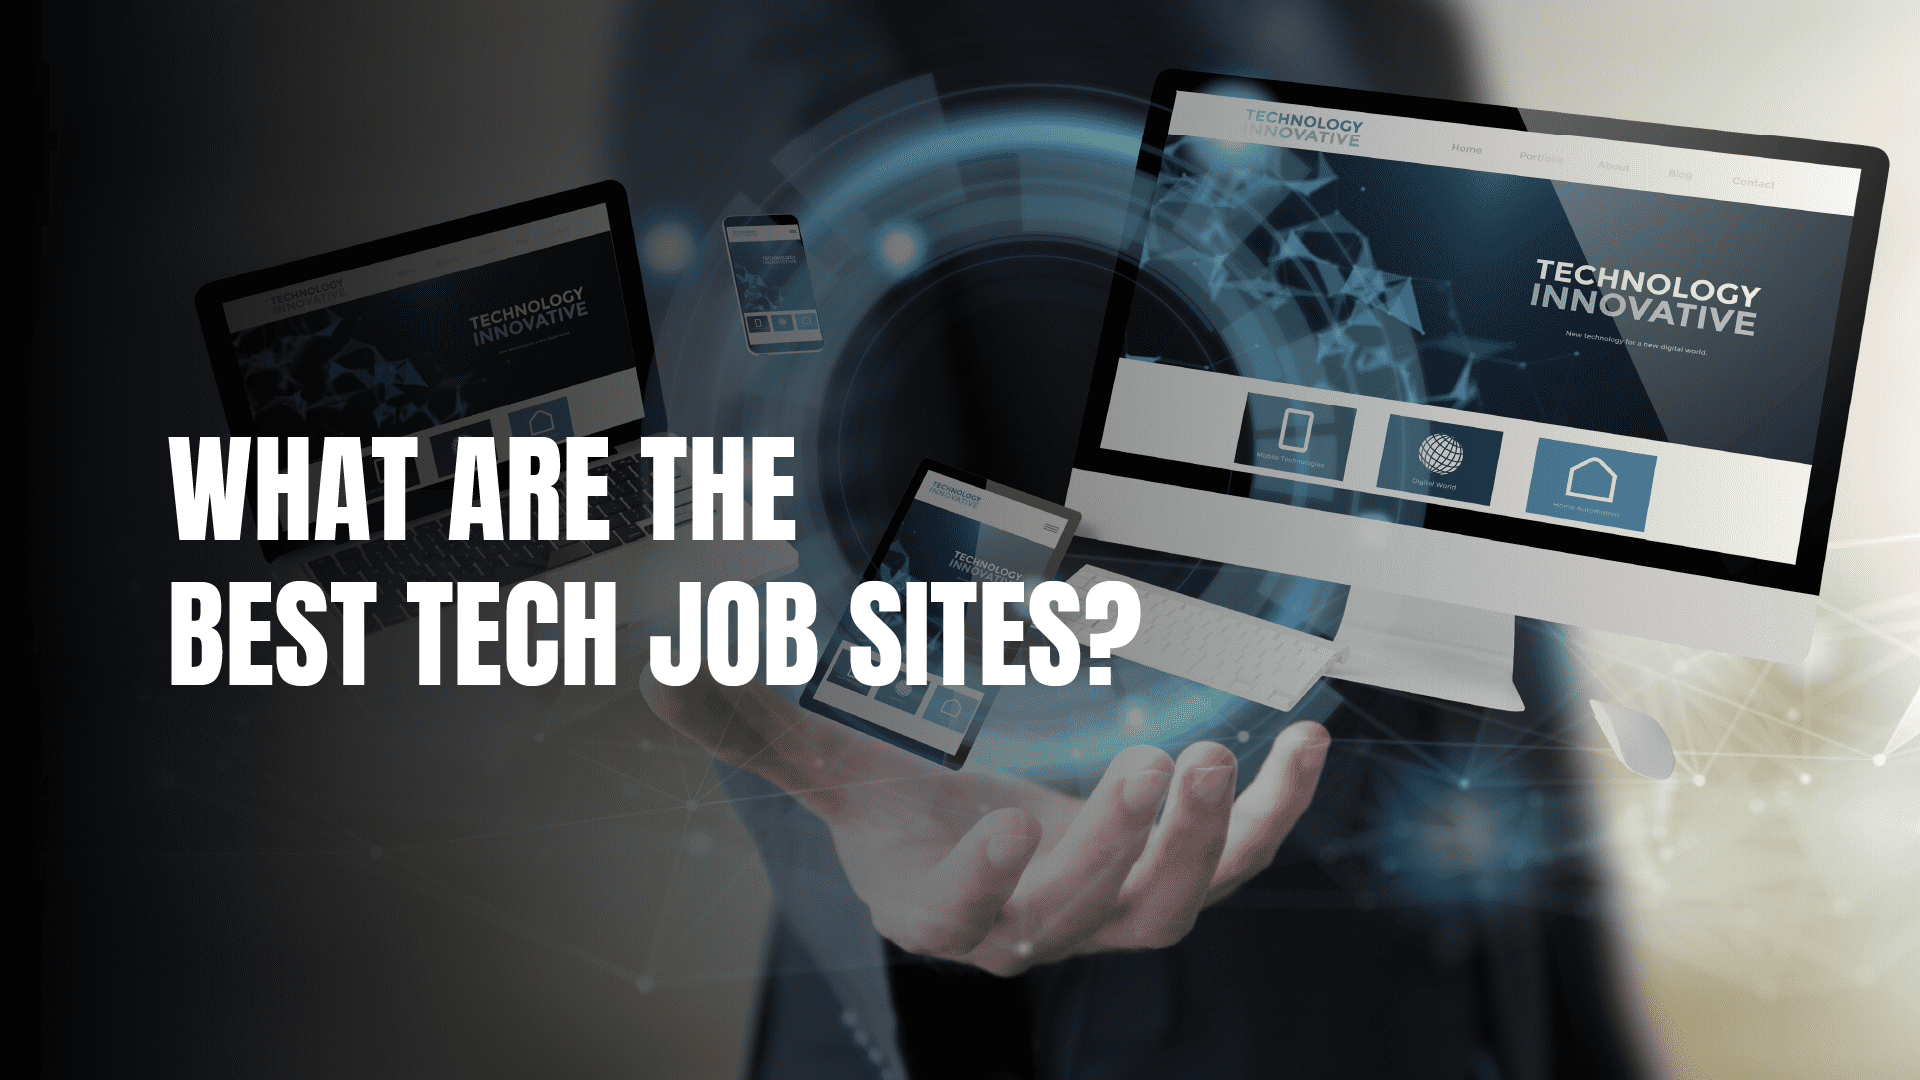 What are the Best Tech Job Sites?